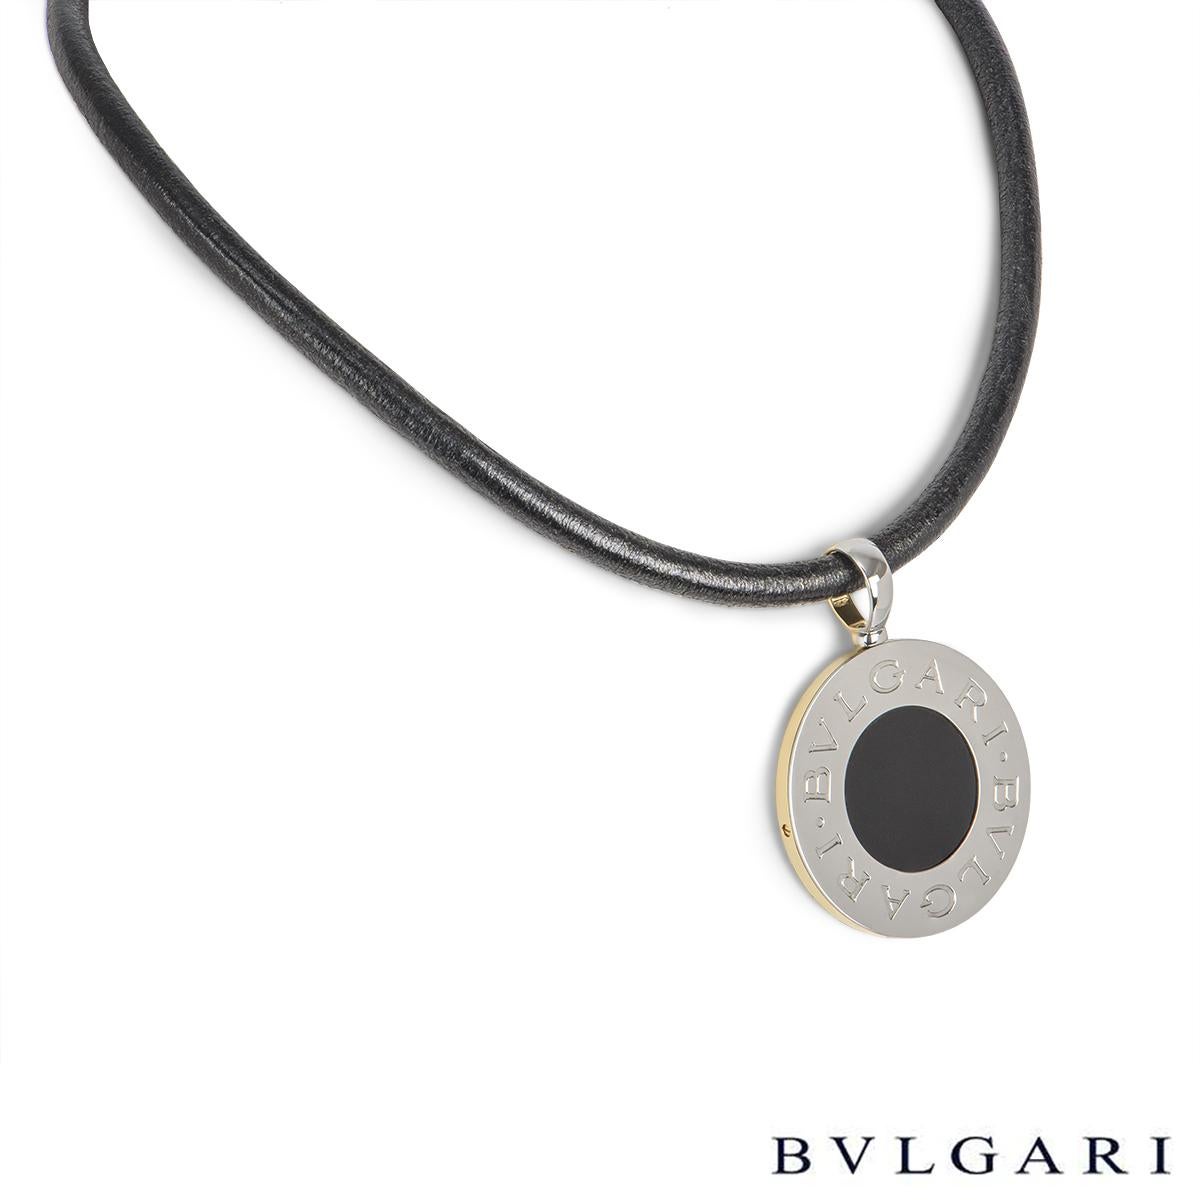 An iconic 18k yellow gold and stainless steel reversible Tondo pendant by Bvlgari. The pendant is set to the centre with an onyx disc with the Bvglari motif around the outer edge. The pendant comes complete on the original 14 inch Bvlgari black cord